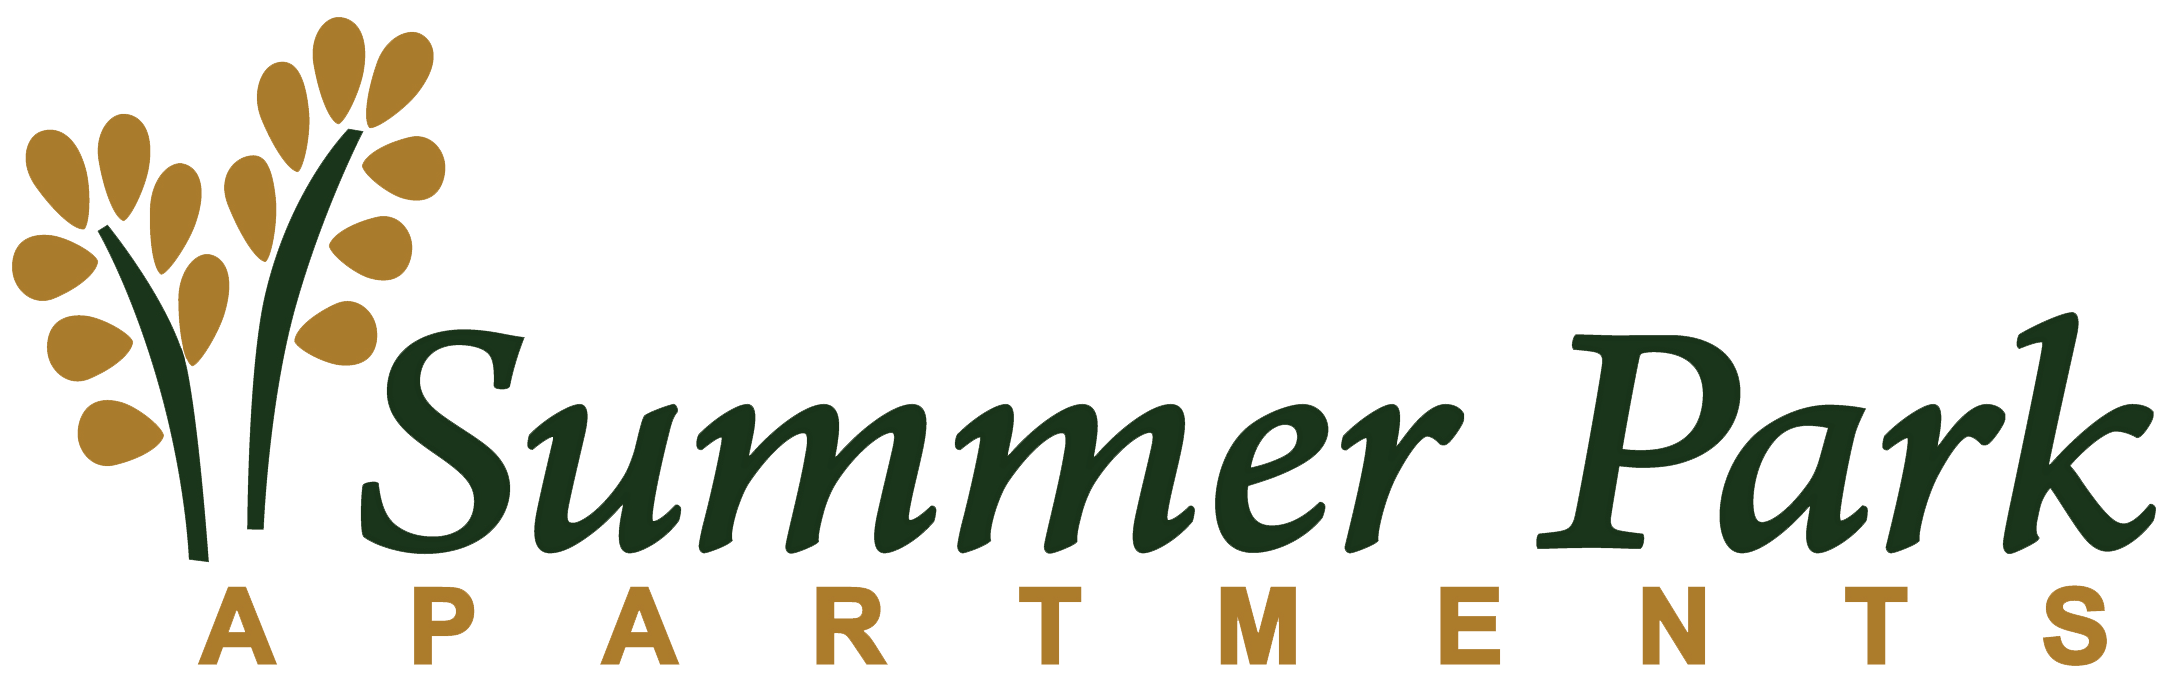 Summer Park Fresno Community Logo designed with gold and green, with some branches on the left side